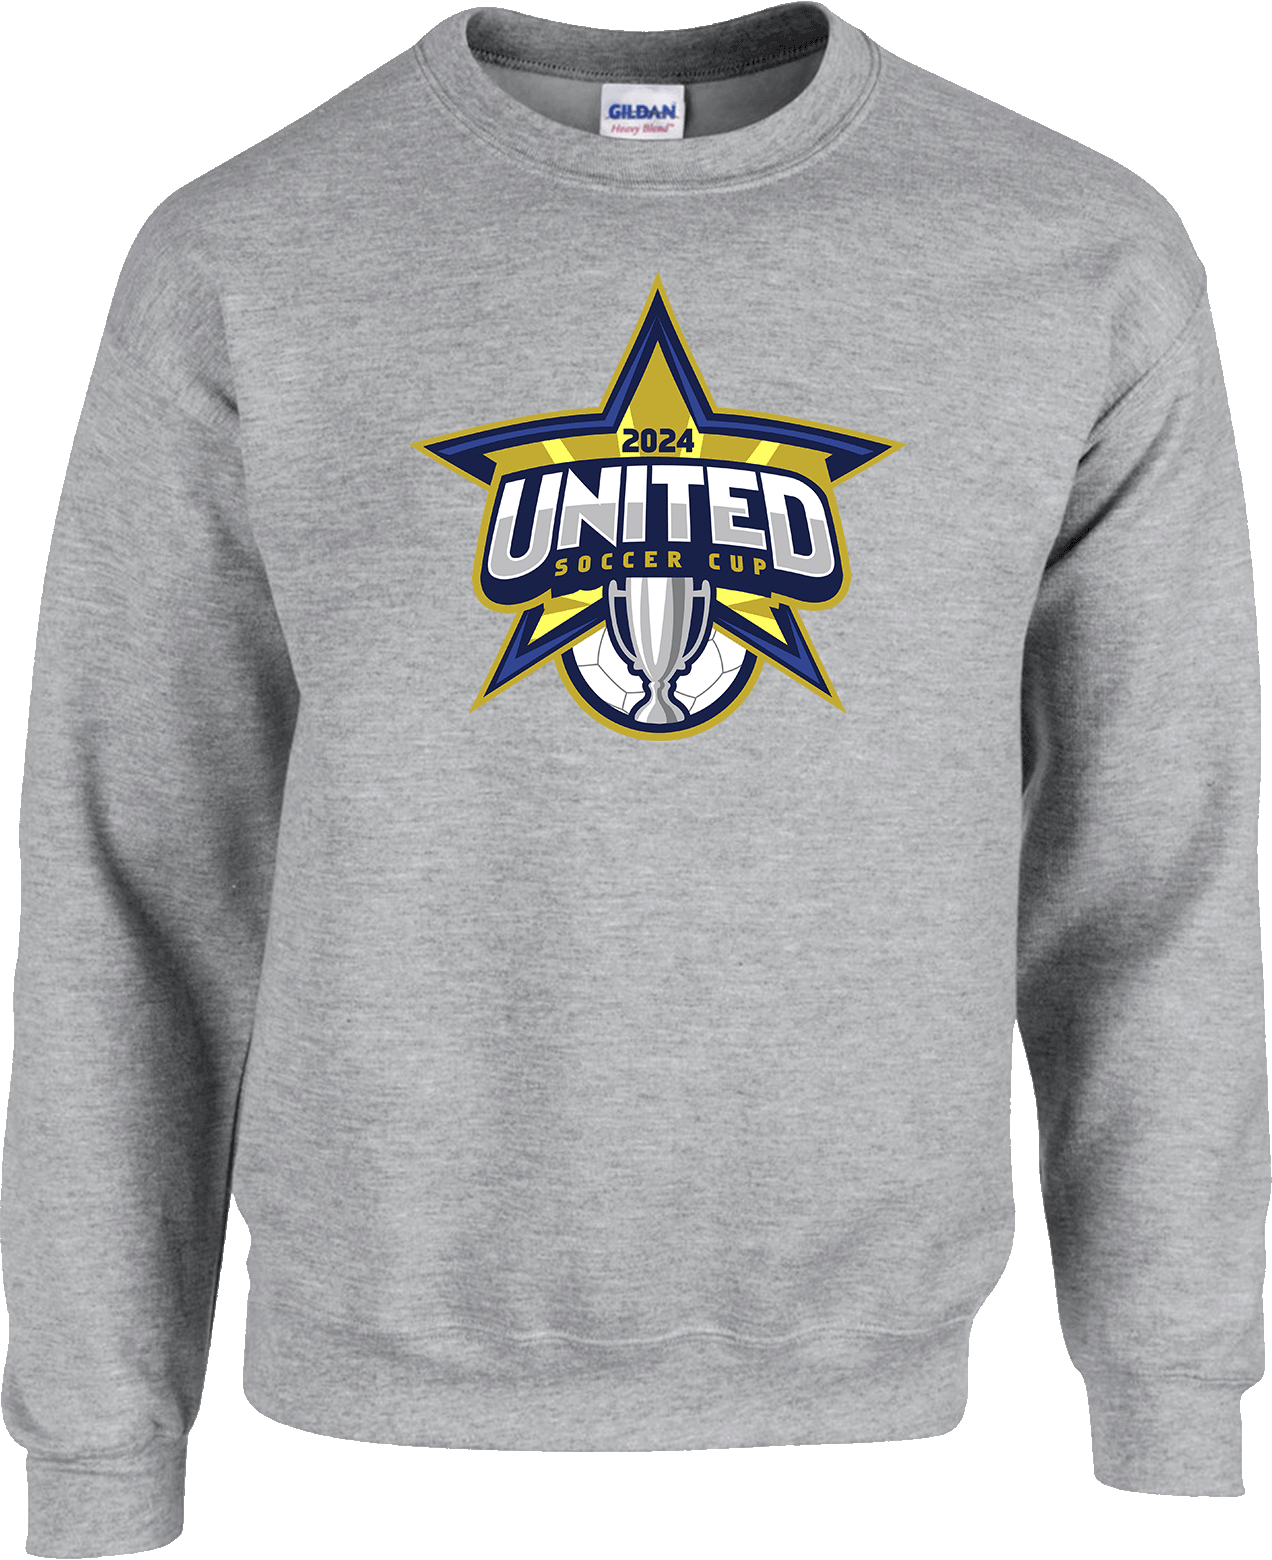 Crew Sweatershirt - 2024 United Soccer Cup